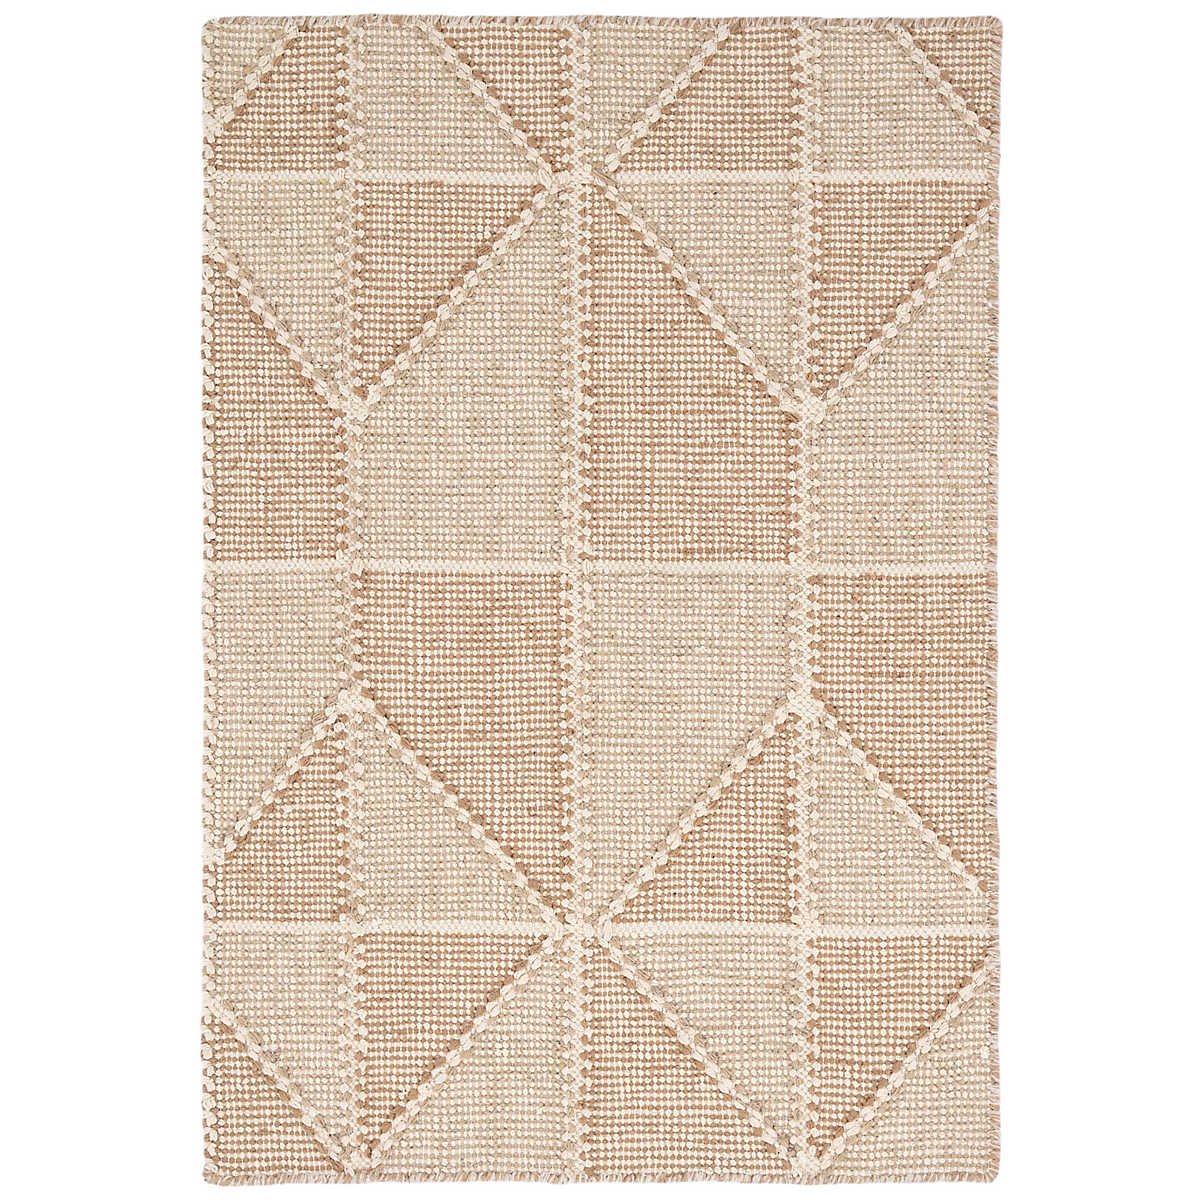 The Ojai Wheat Rug features a geometric diamond pattern with multi tonal textural stitches executed in a two colors, creating an intriguingly hypnotic effect on this contemporary rug. Handwoven in India, this is a compelling composition for the modern interior. Amethyst Home provides interior design services, furniture, rugs, and lighting in the Seattle metro area.